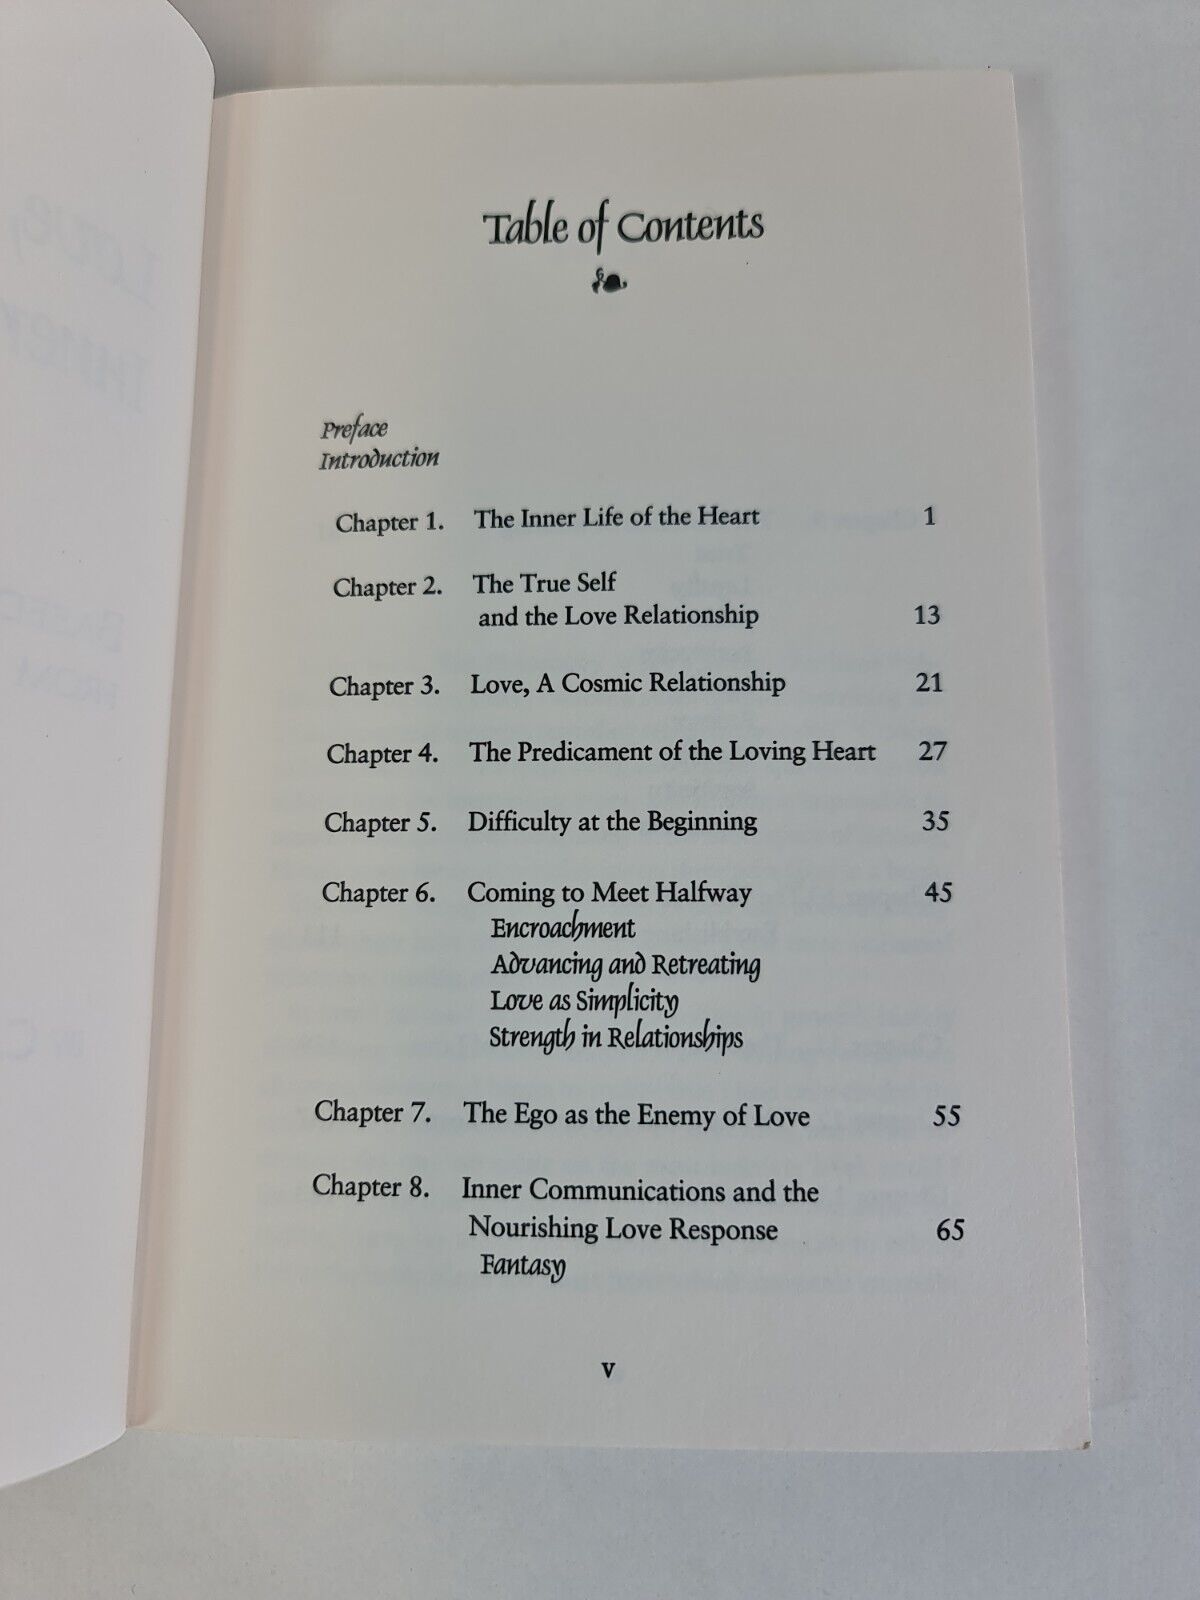 Love, an Inner Connection: Based on Principles Drawn from the I Ching (1993)